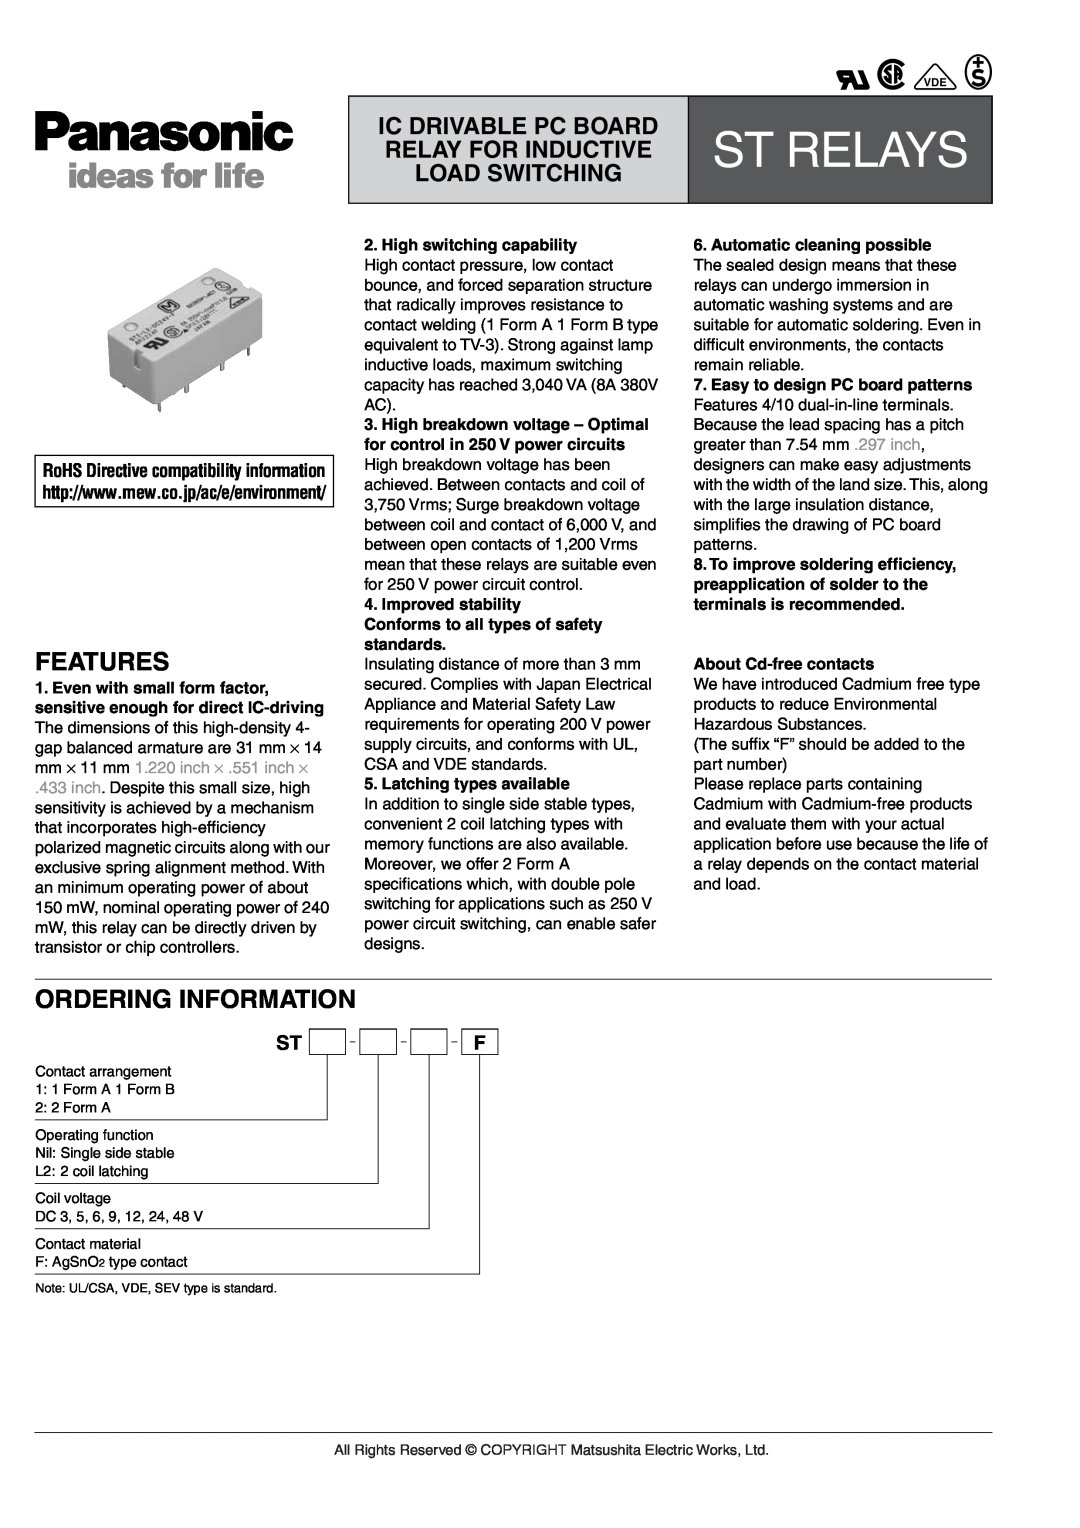 Panasonic IC Drivable PC Board dimensions Features, Ordering Information, Latching types available, About Cd-free contacts 